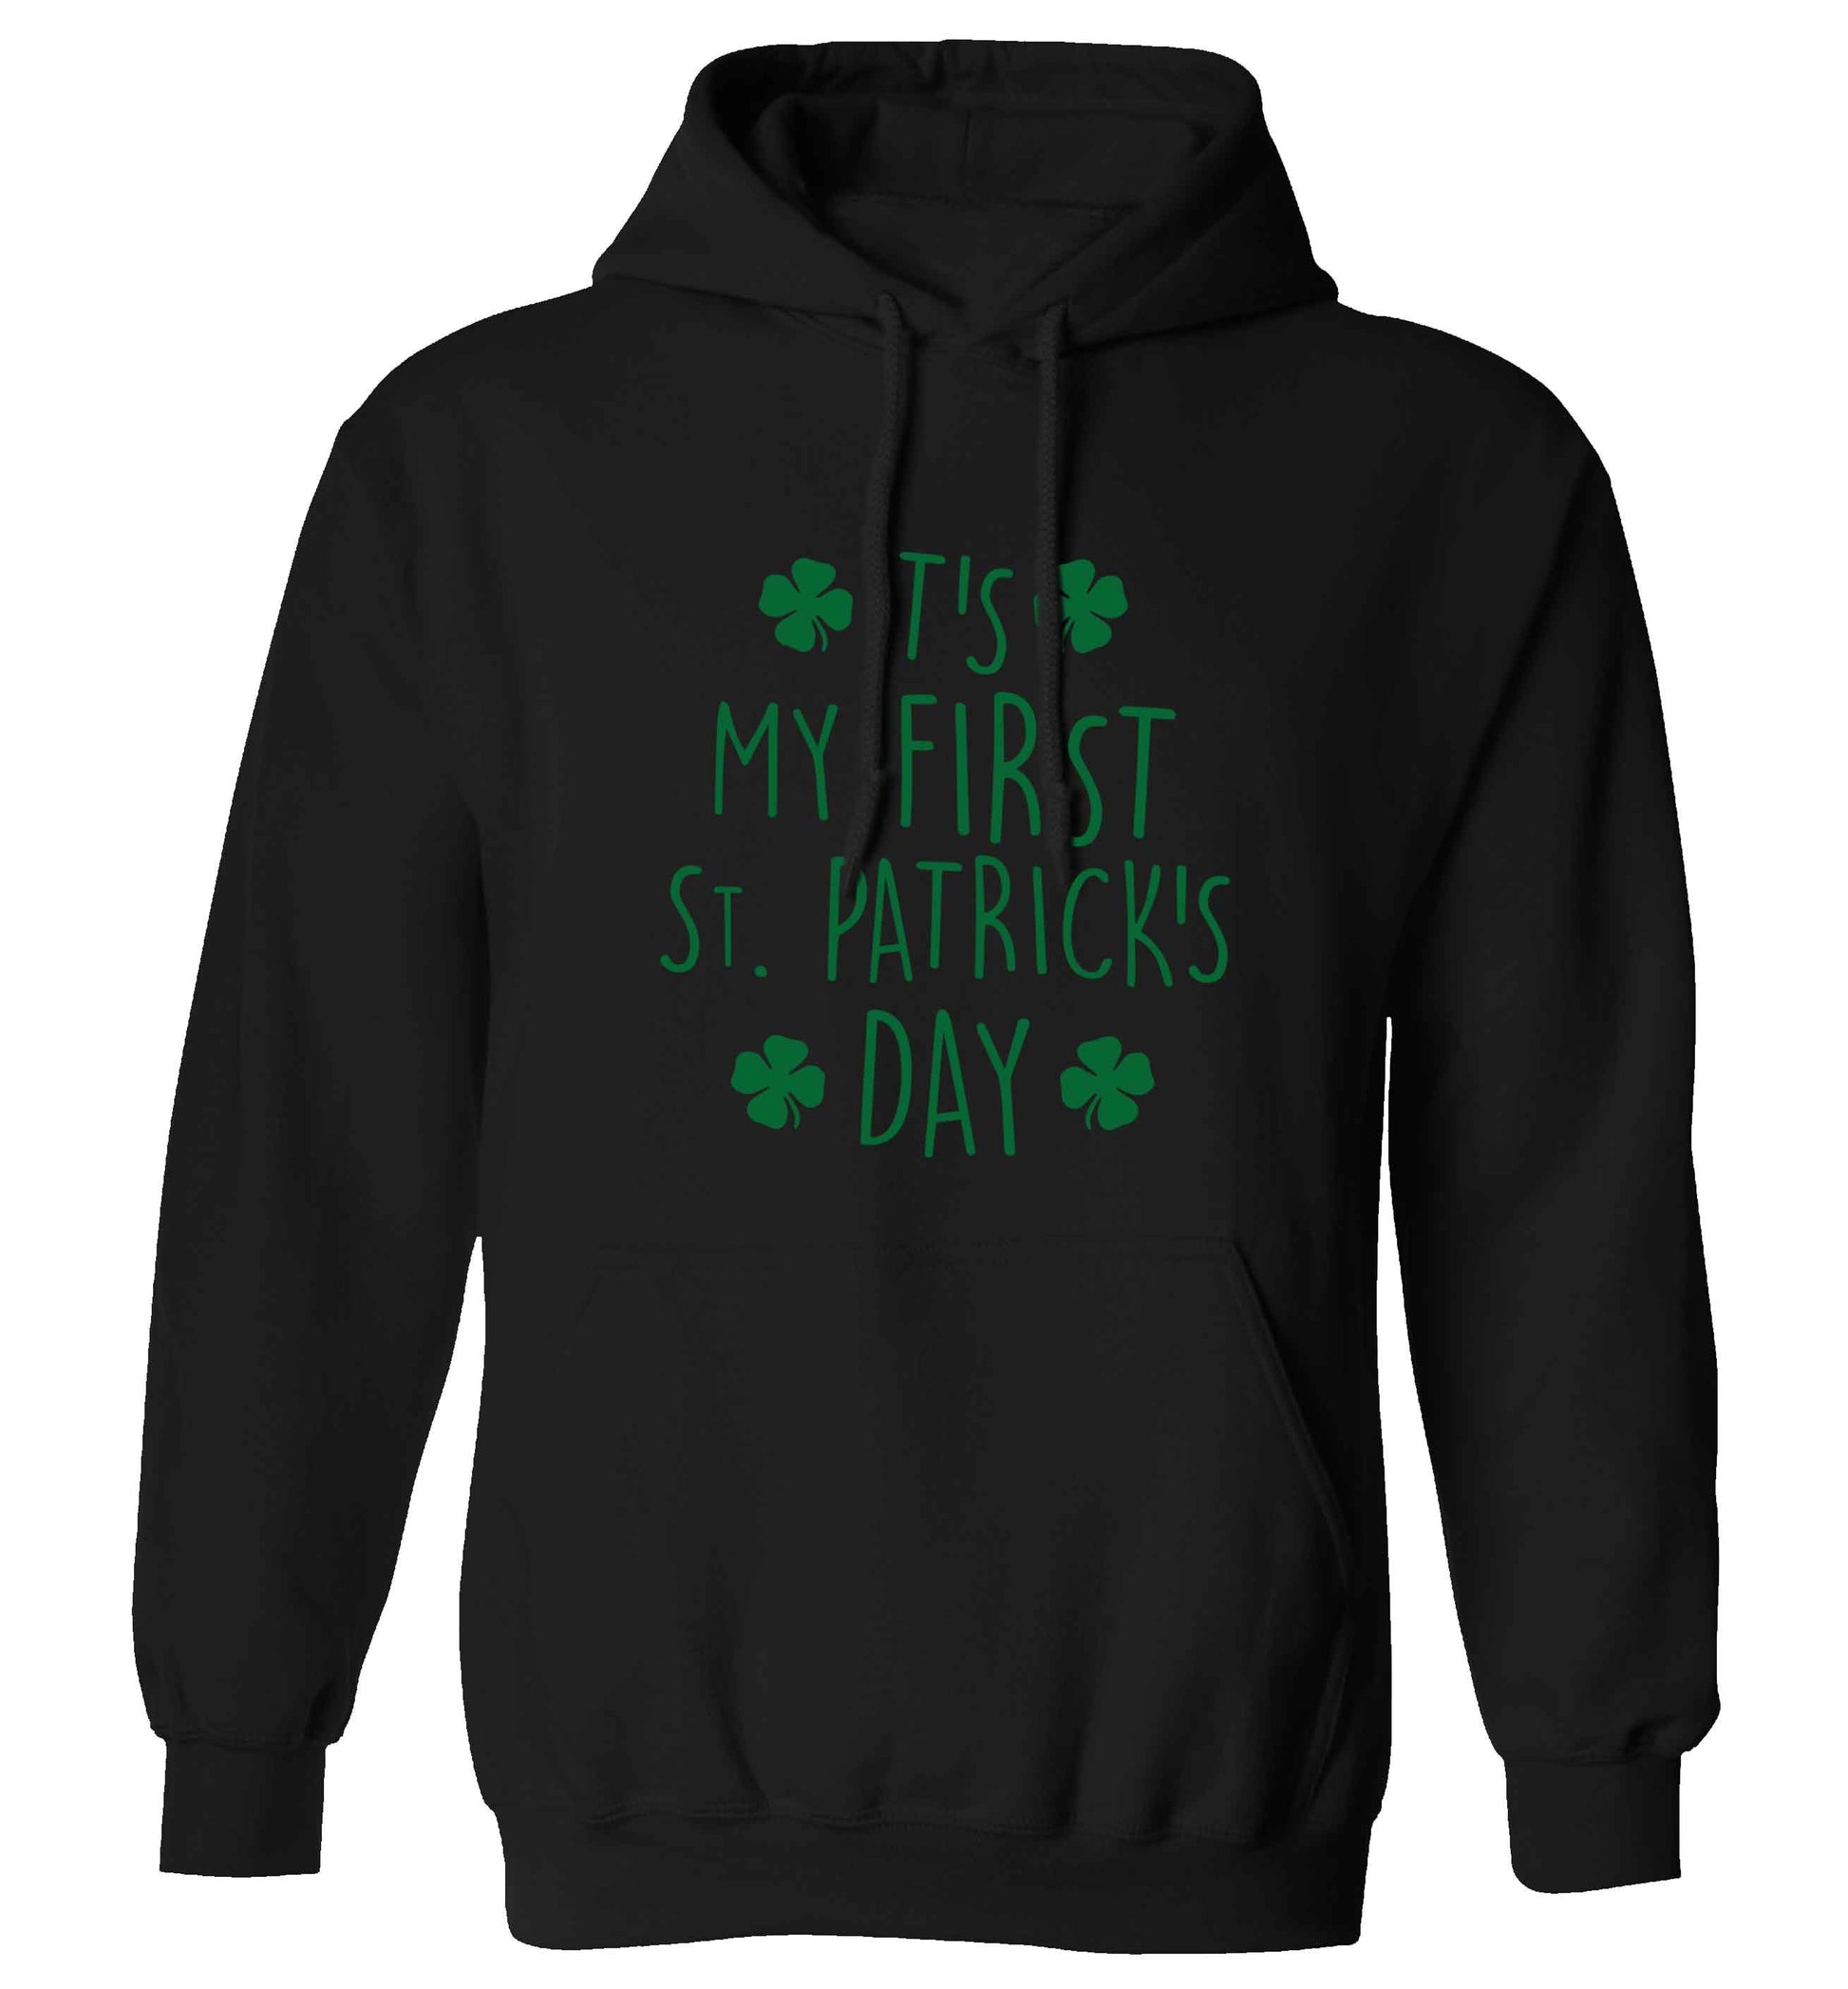 It's my first St.Patrick's day adults unisex black hoodie 2XL